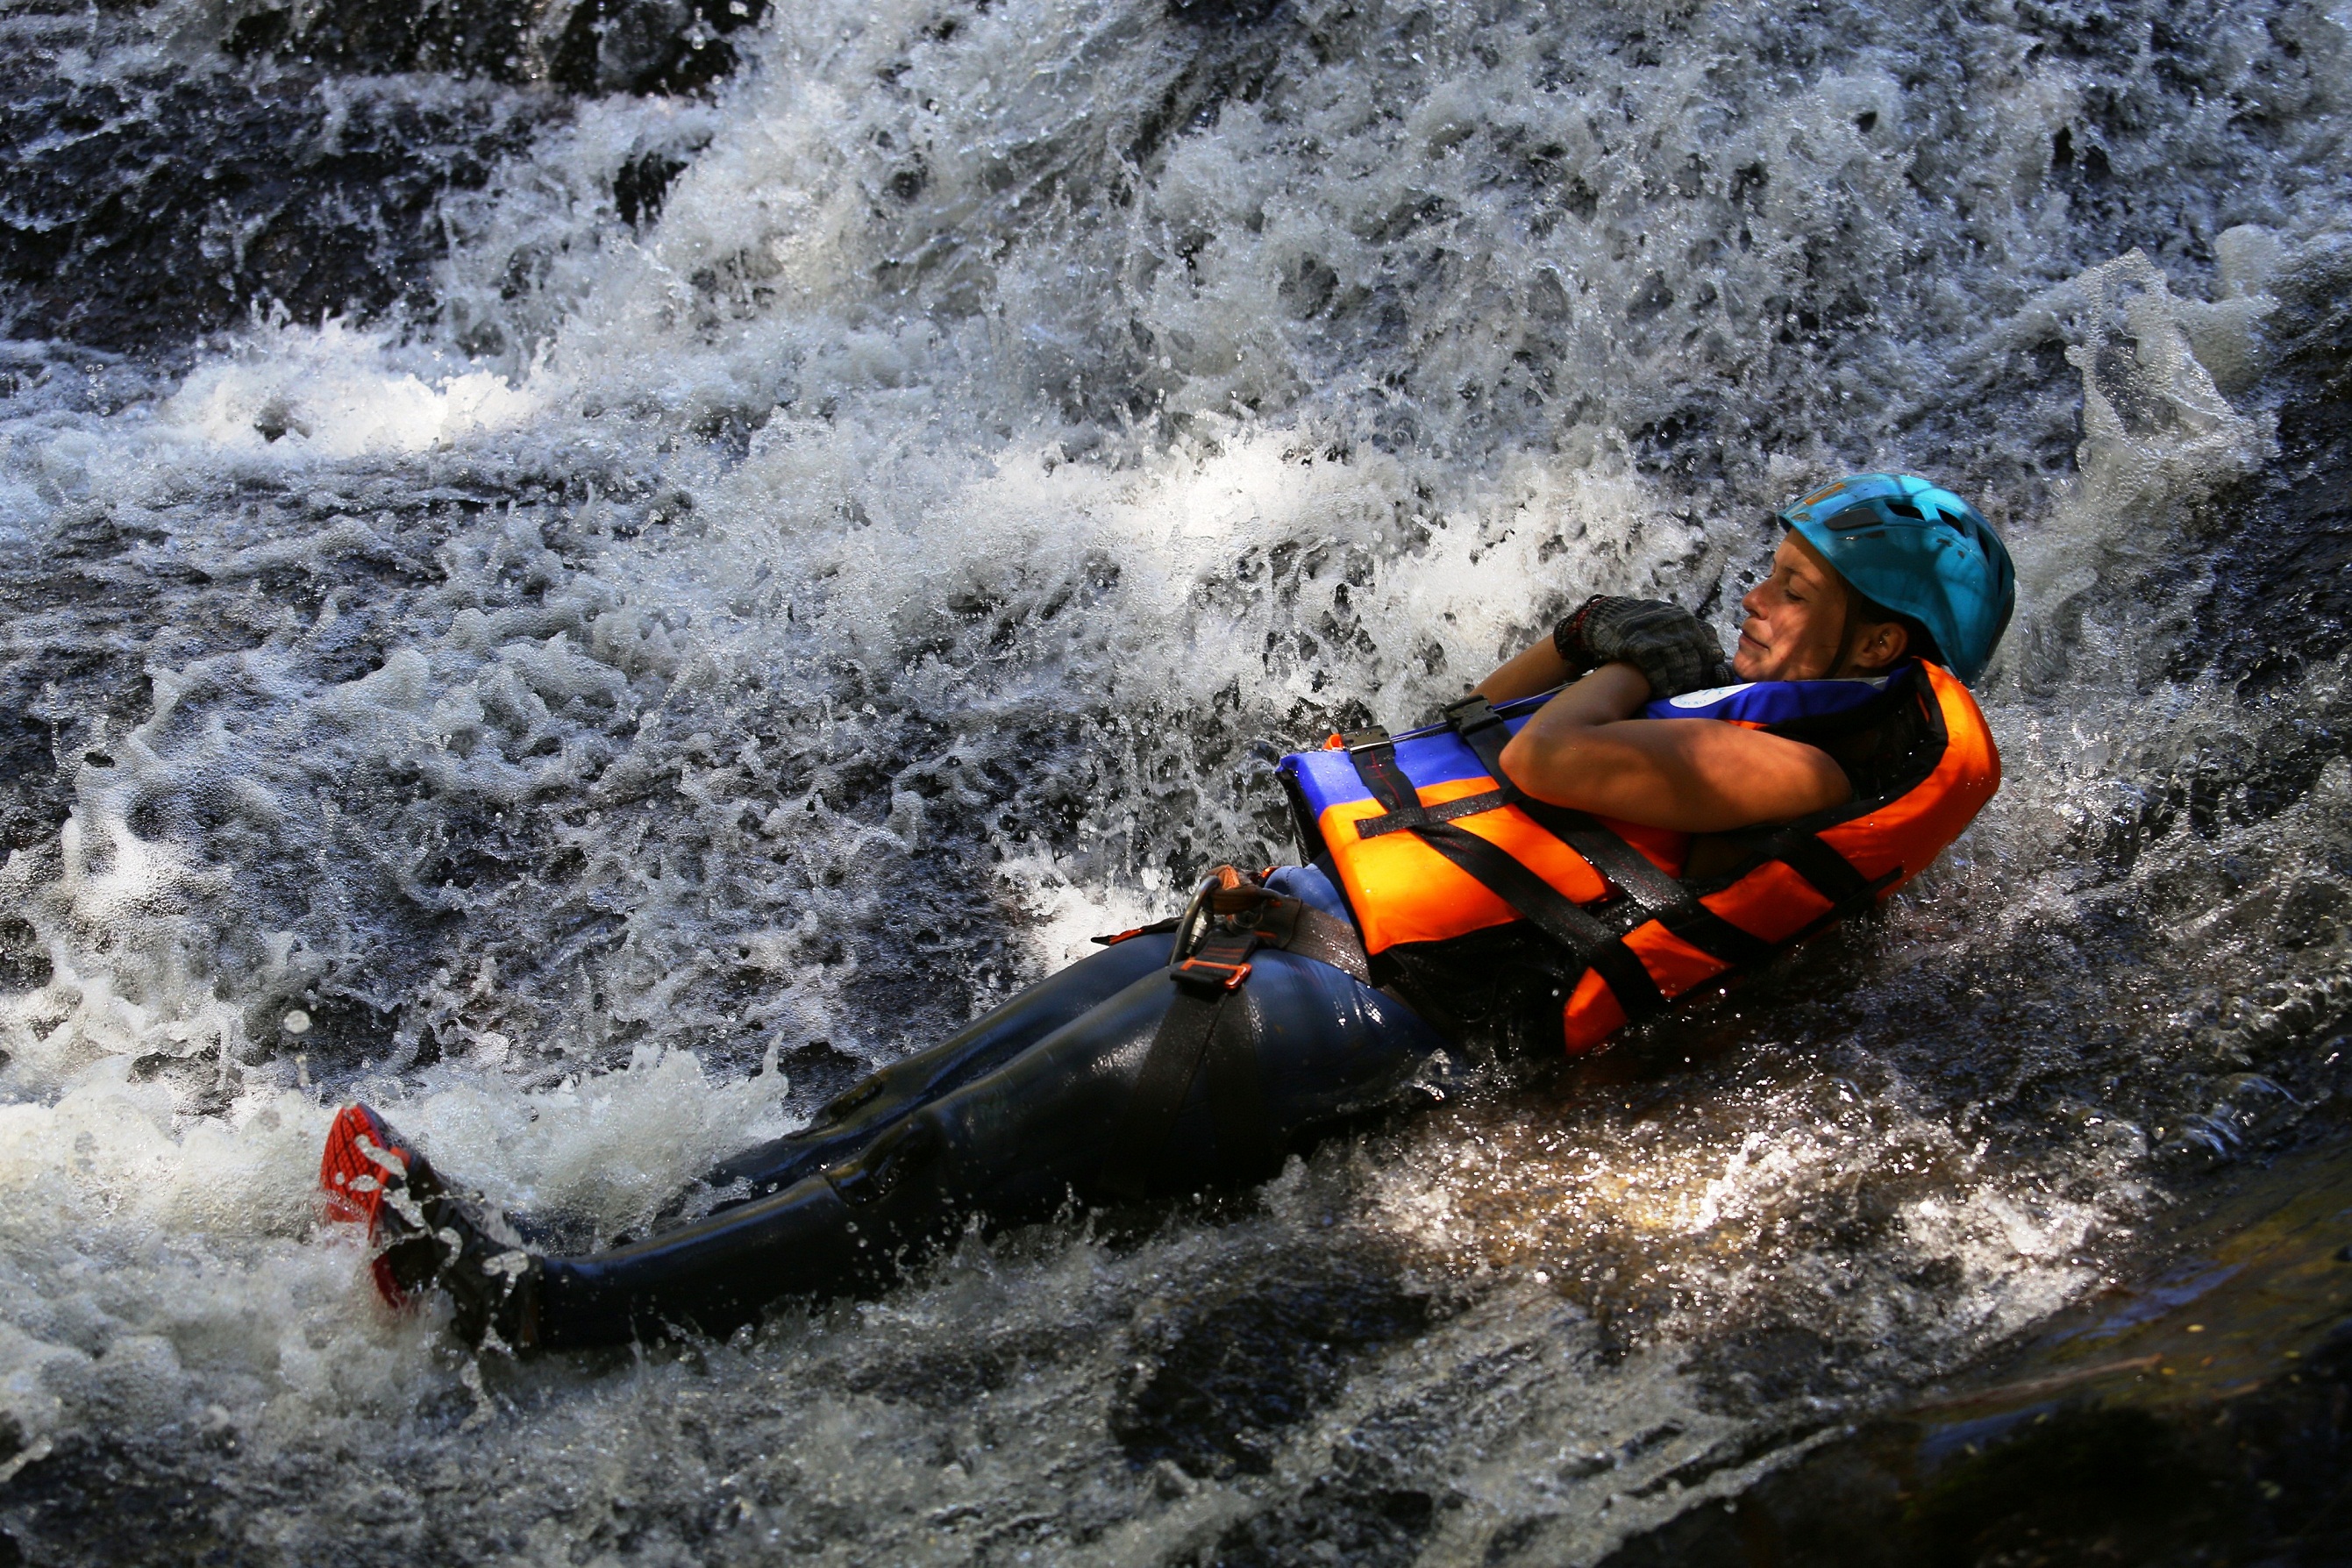 Int’l tourists mesmerized by canyoning in Vietnam’s Da Lat resort city